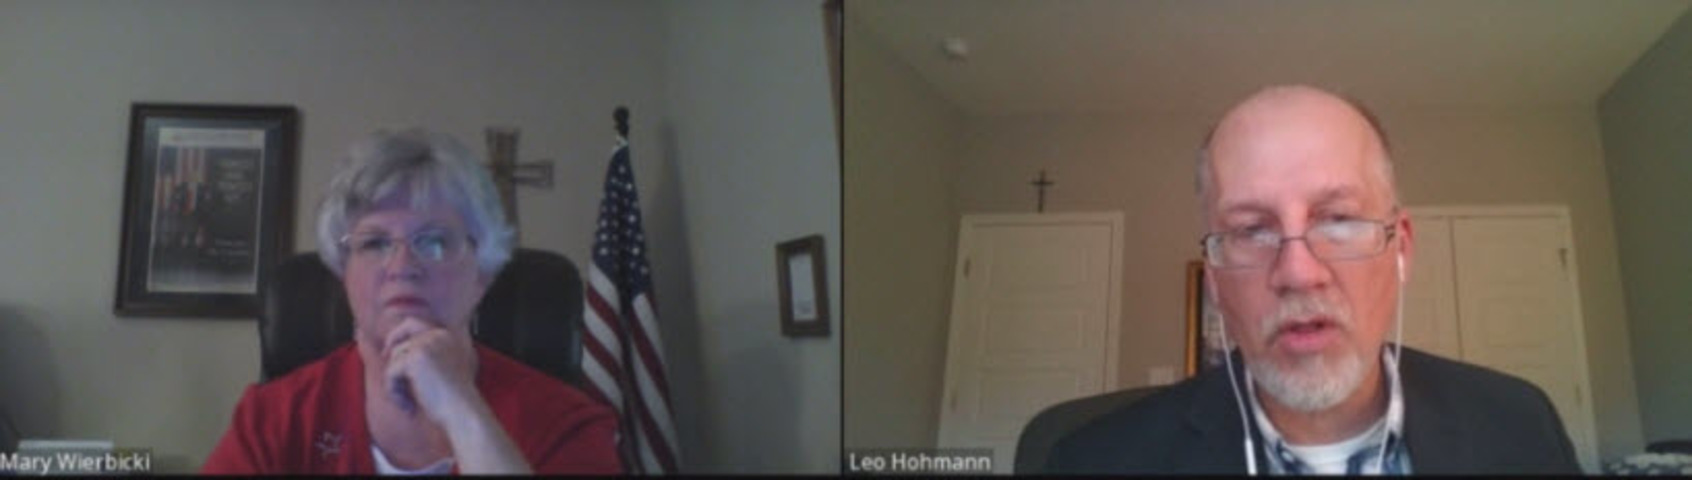 SHARIA CRIME STOPPERS: NEWS BRIEFING WITH AUTHOR/JOURNALIST LEO HOHMANN